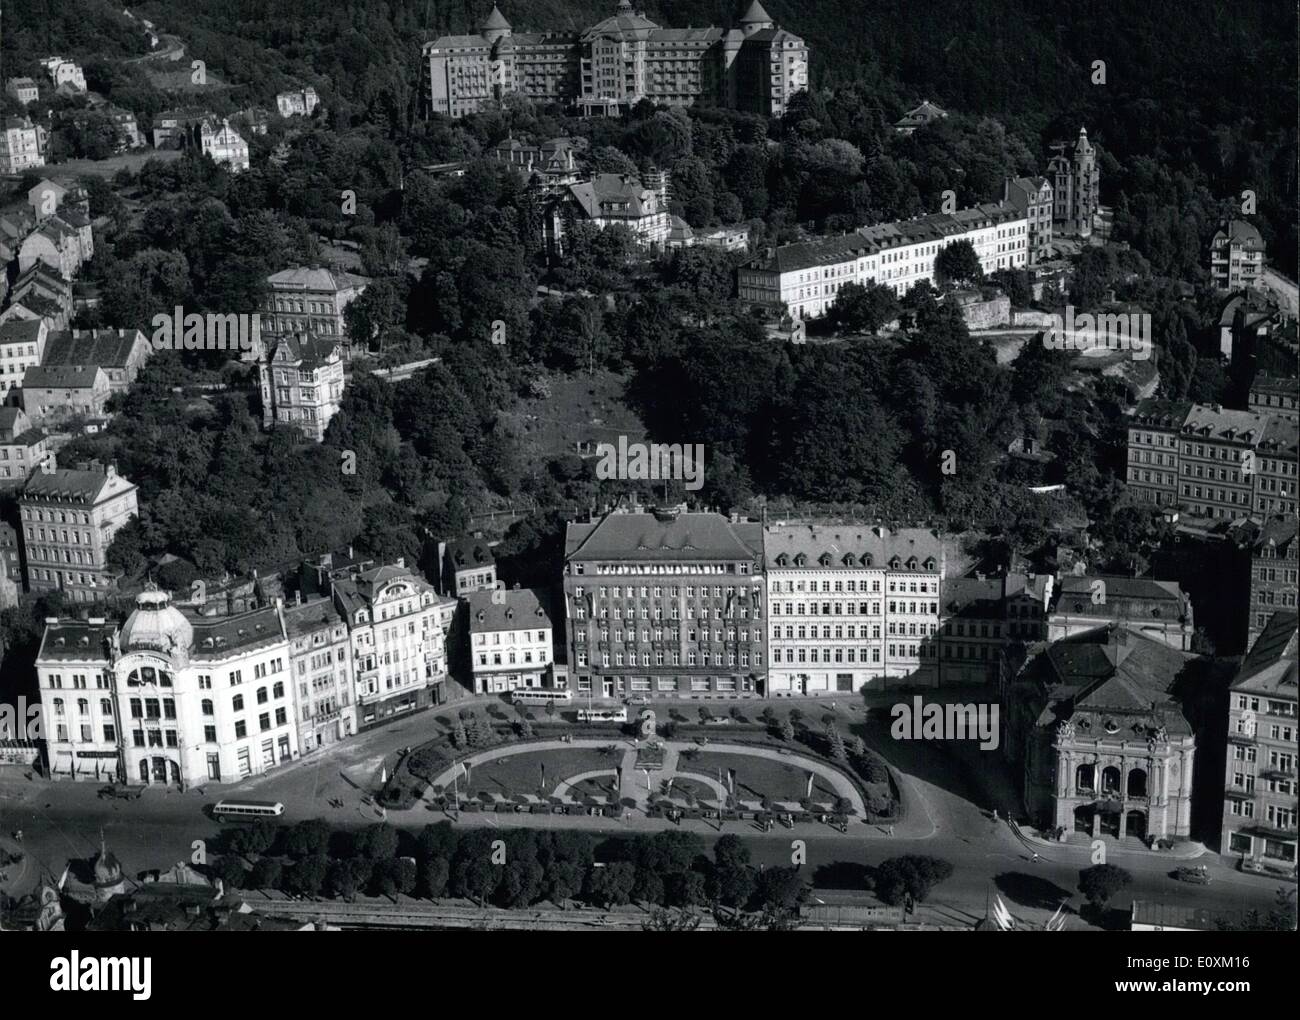 Apr. 04, 1967 - Conference of European communist and workers parties in Karlovy Vary (West Bohemia): View of the West Bohemian Spa Karlovy Vary, in the background the ''Imperial Hotel'', the scene of the Conference of European Communist and workers Parties which started on April 24th, 1967. Stock Photo